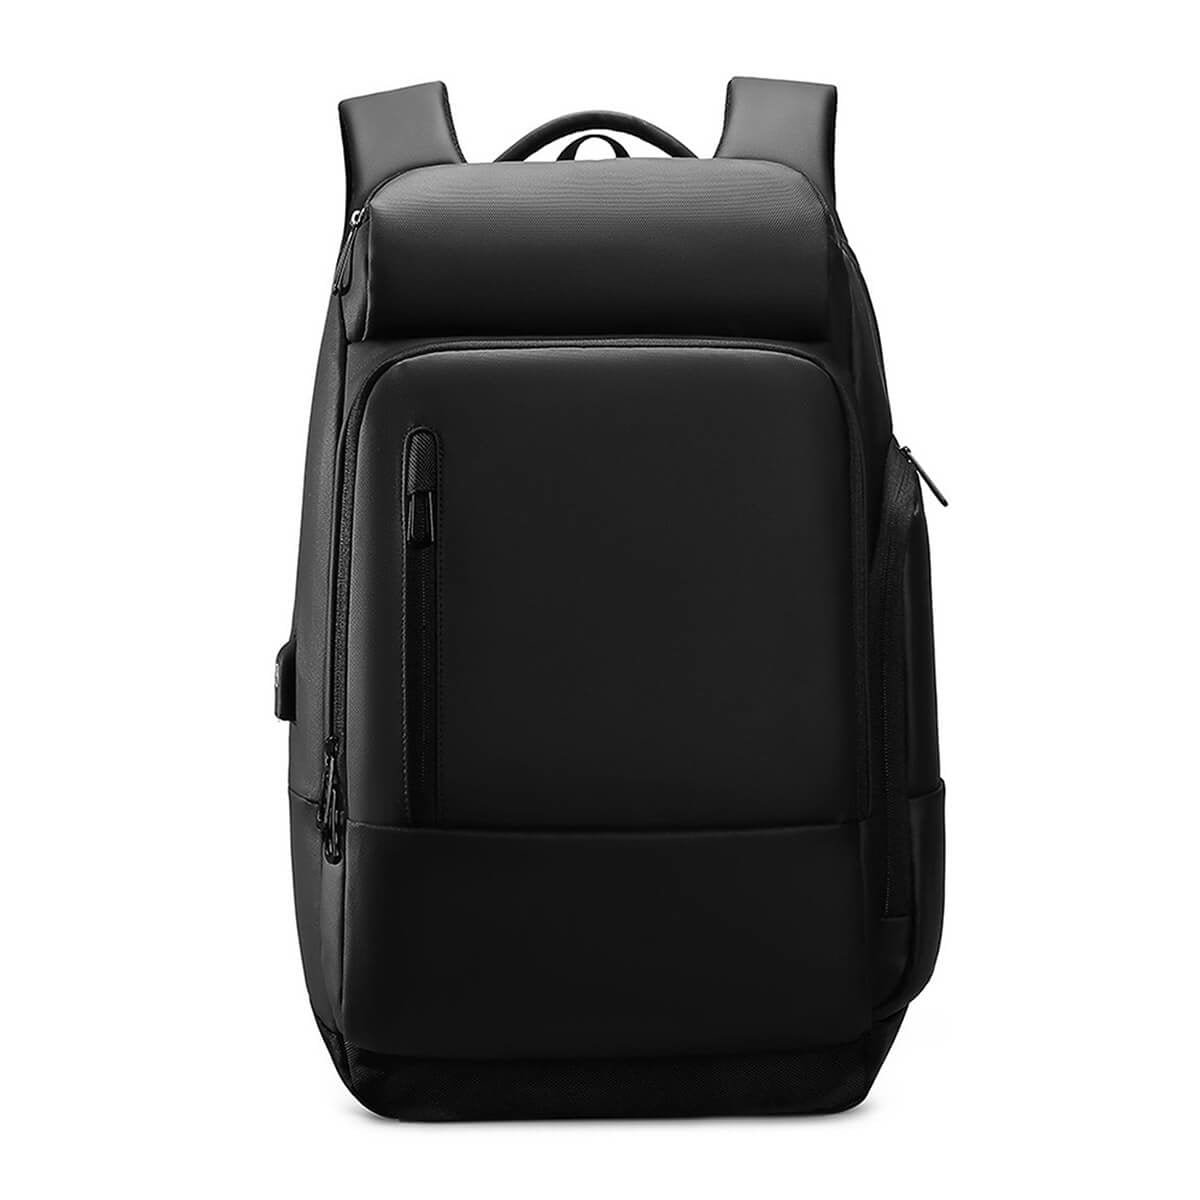 Large waterproof laptop backpack with USB port front view